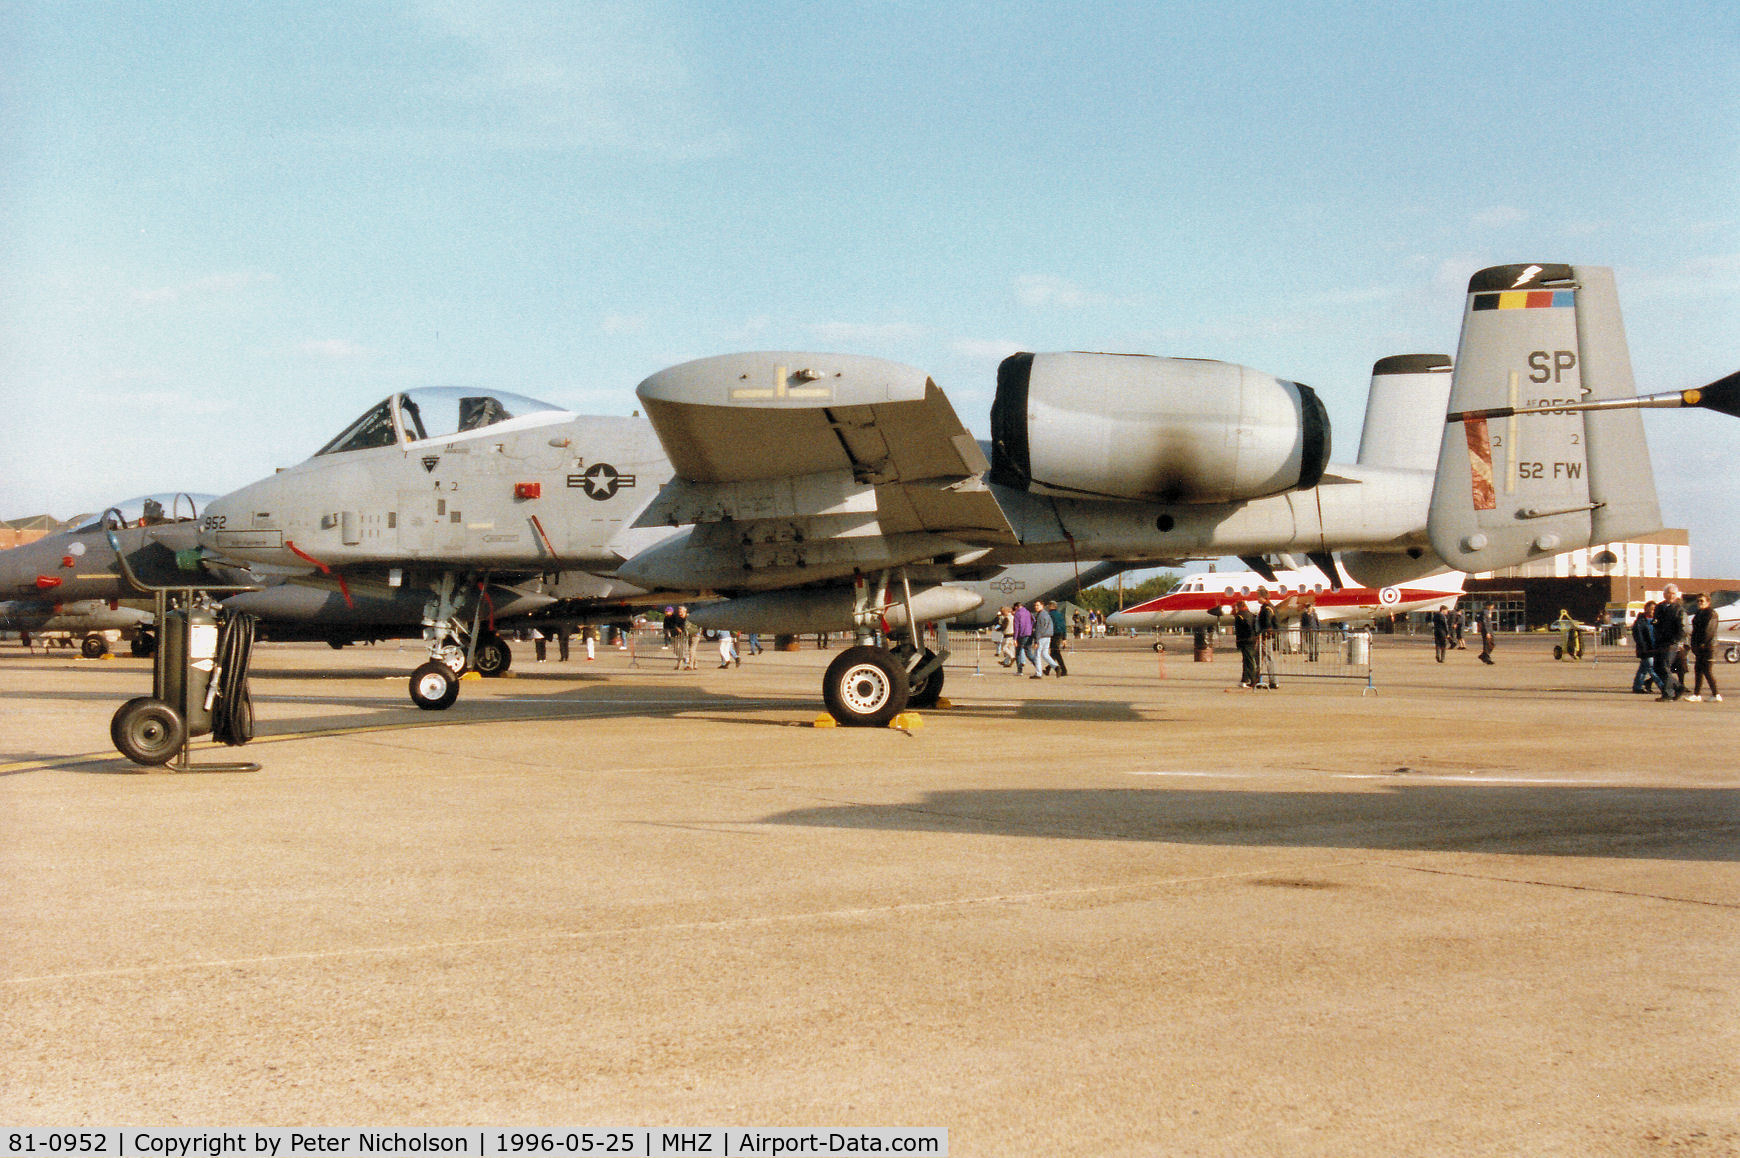 81-0952, 1981 Fairchild Republic A-10A Thunderbolt II C/N A10-0647, Wing Commander's A-10A Thunderbolt of 52nd Fighter Wing on display at the 1996 RAF Mildenhall Air Fete.